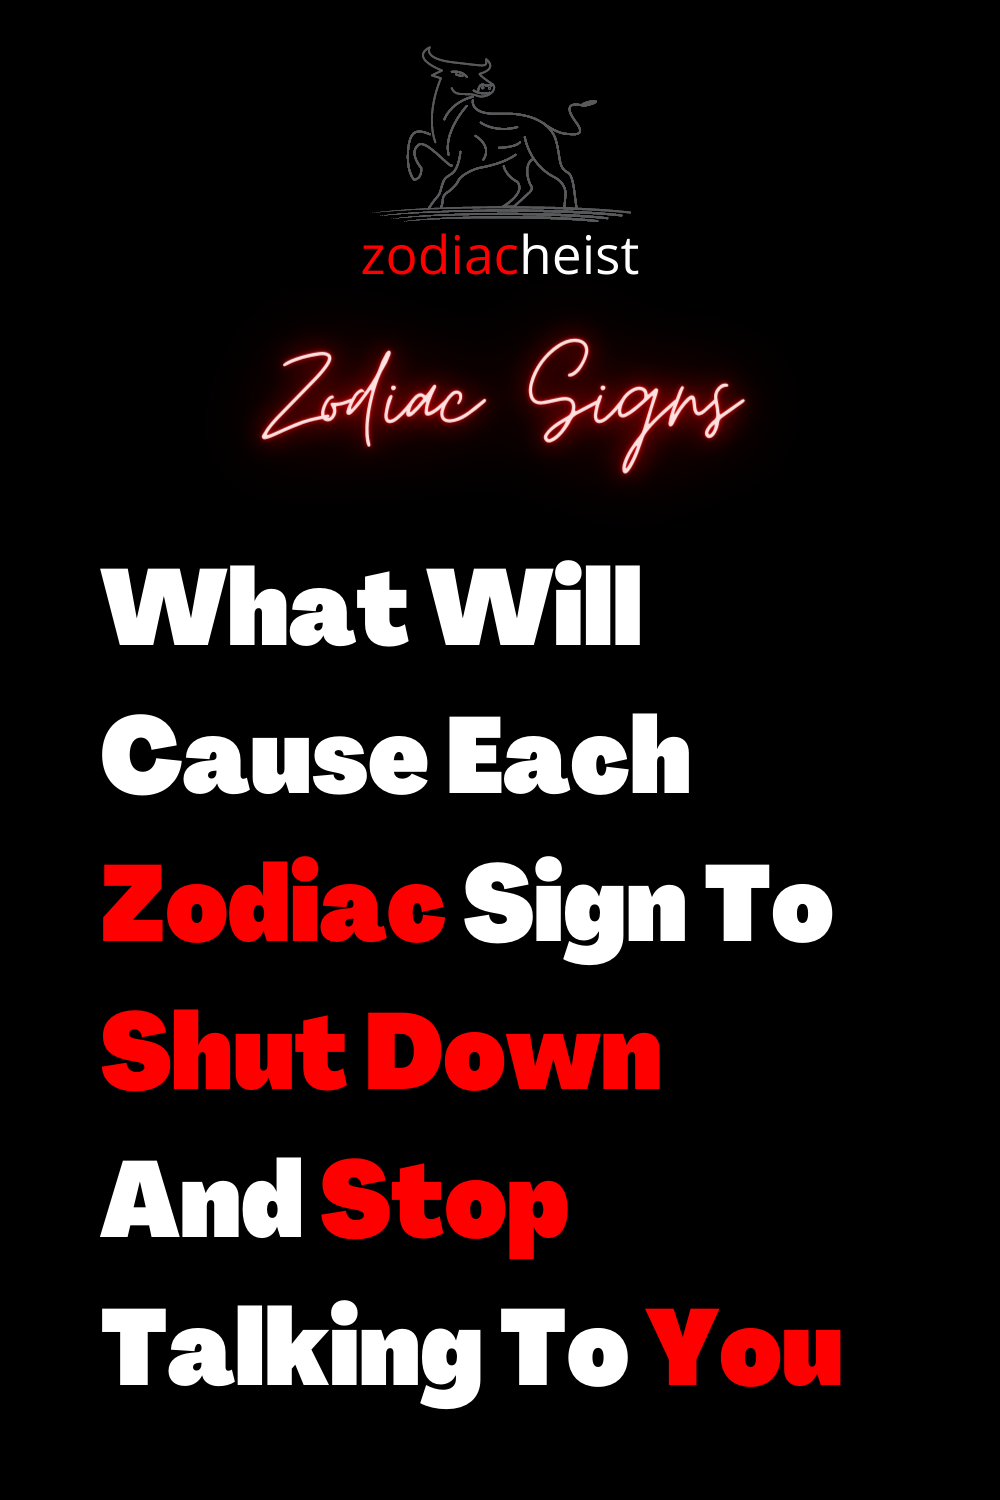 What Will Cause Each Zodiac Sign To Shut Down And Stop Talking To You